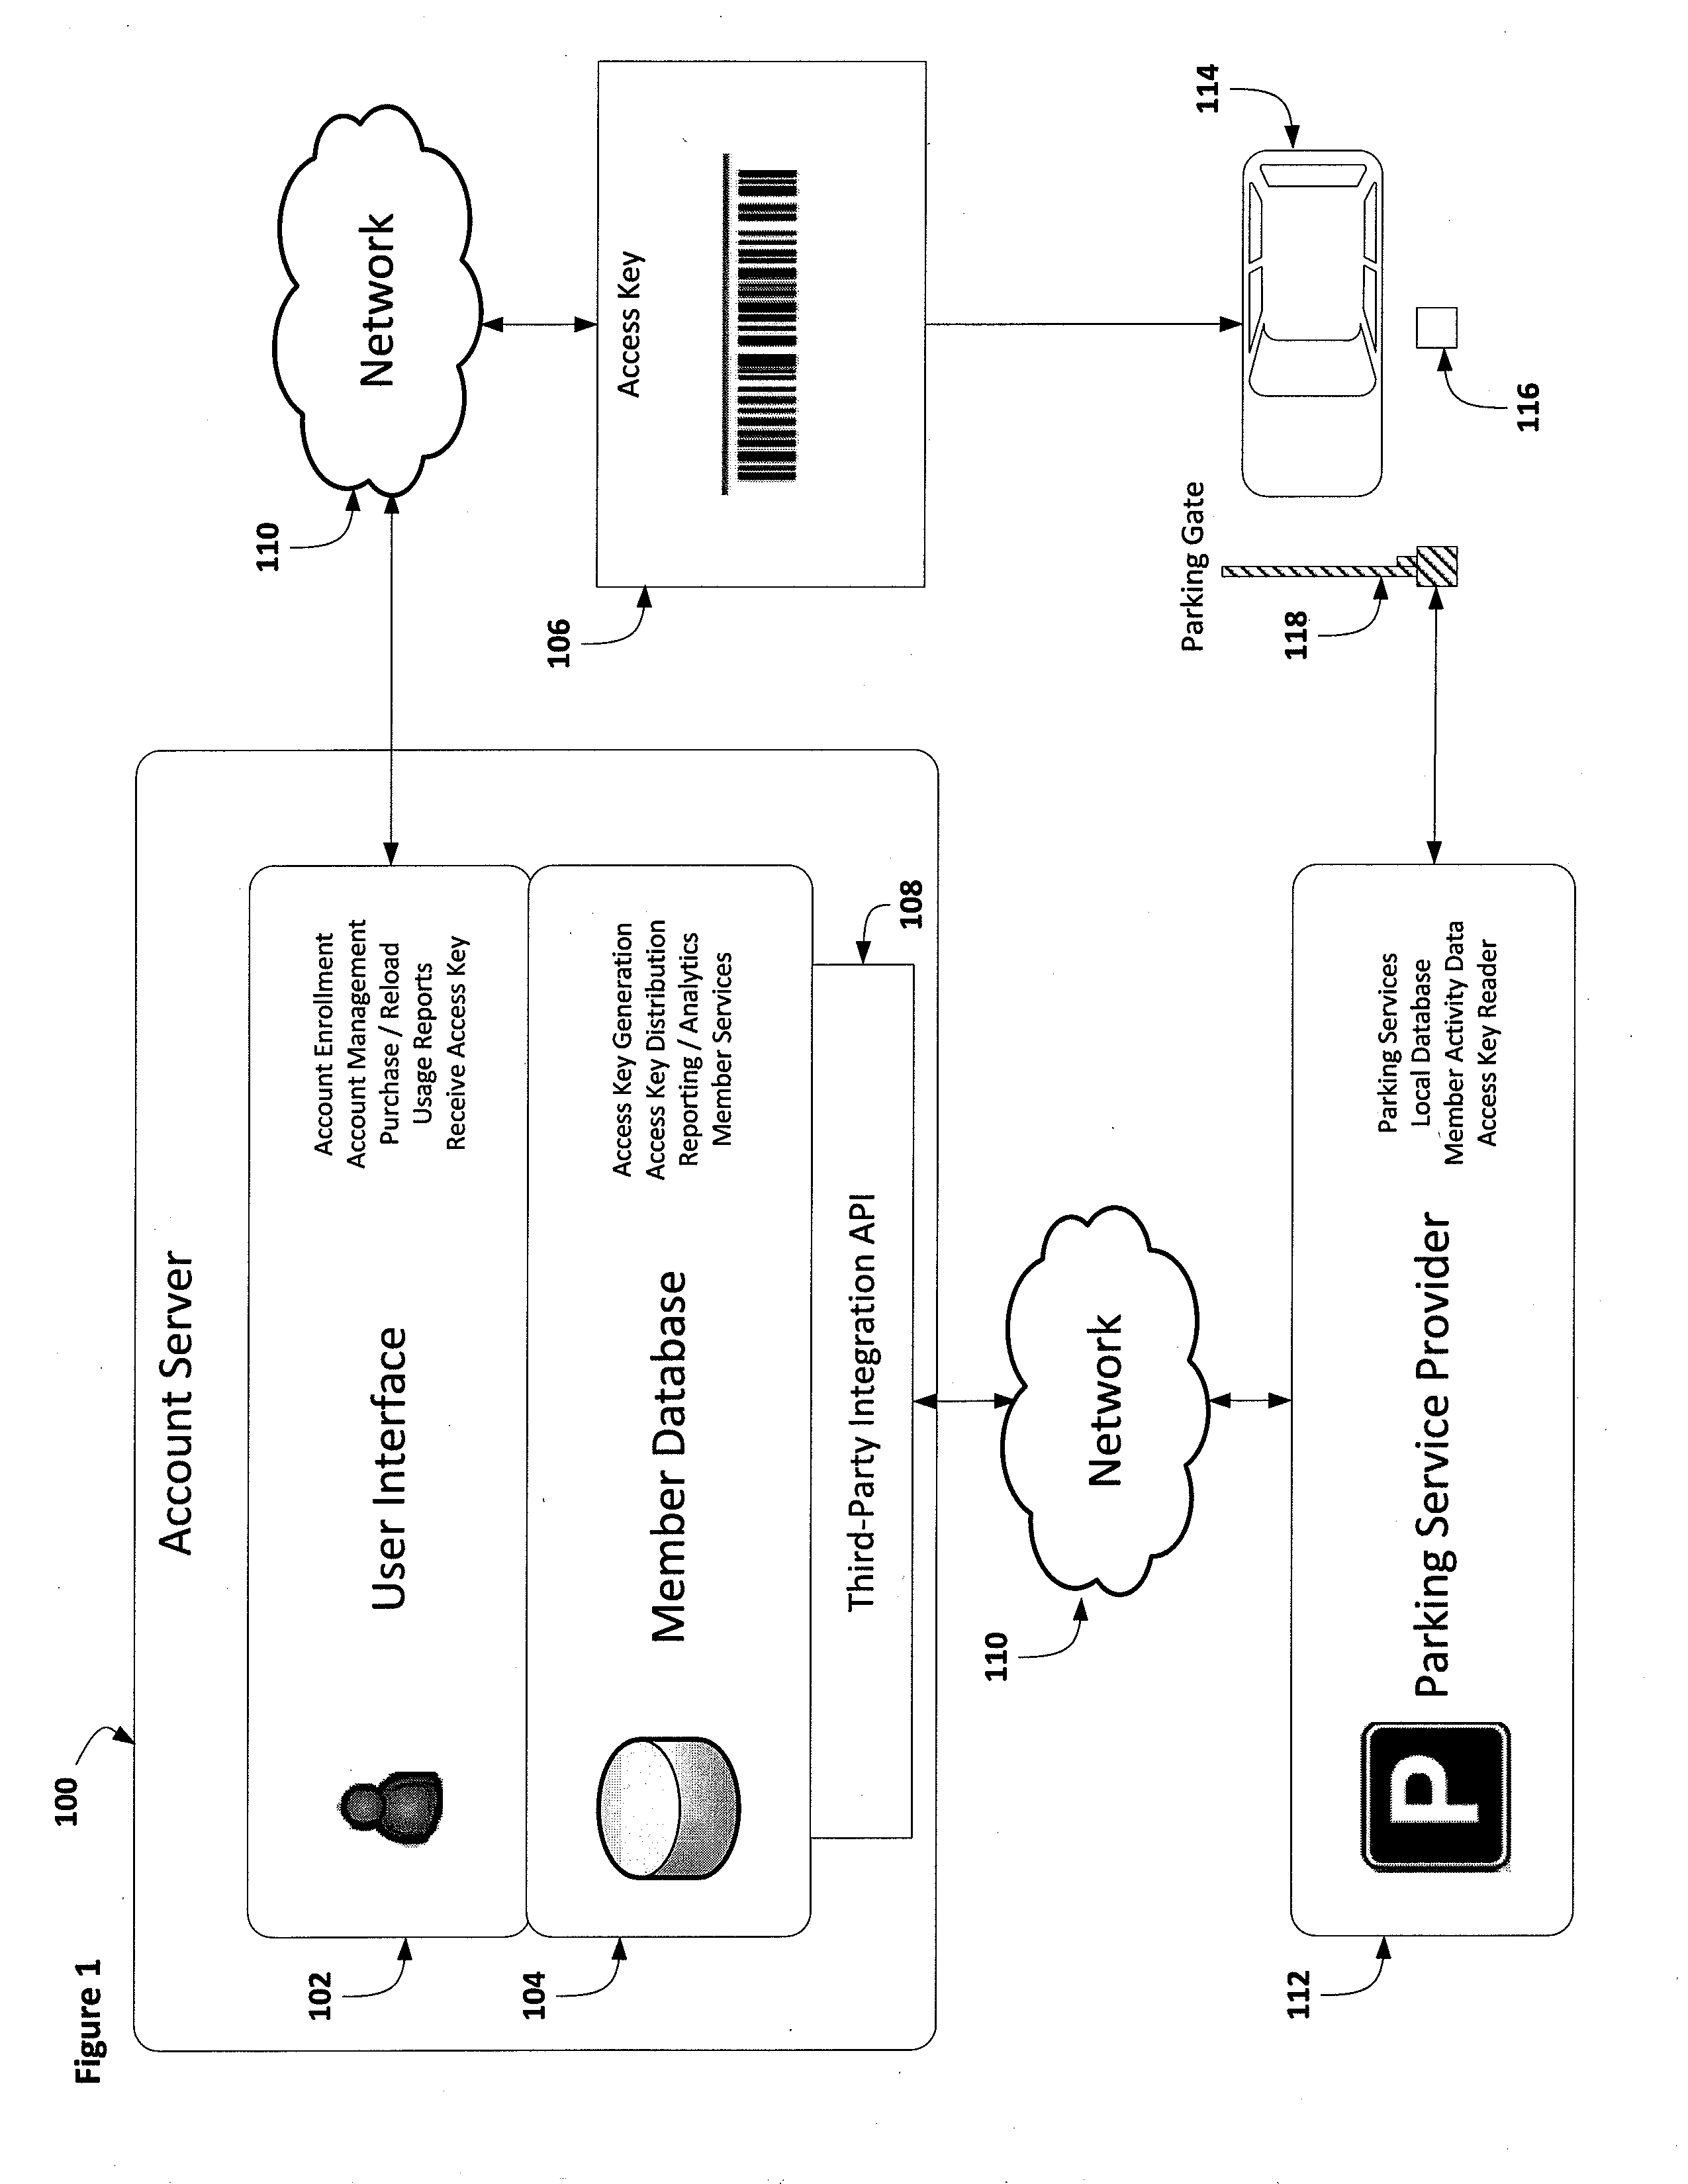 Systems and methods for an automated parking facility